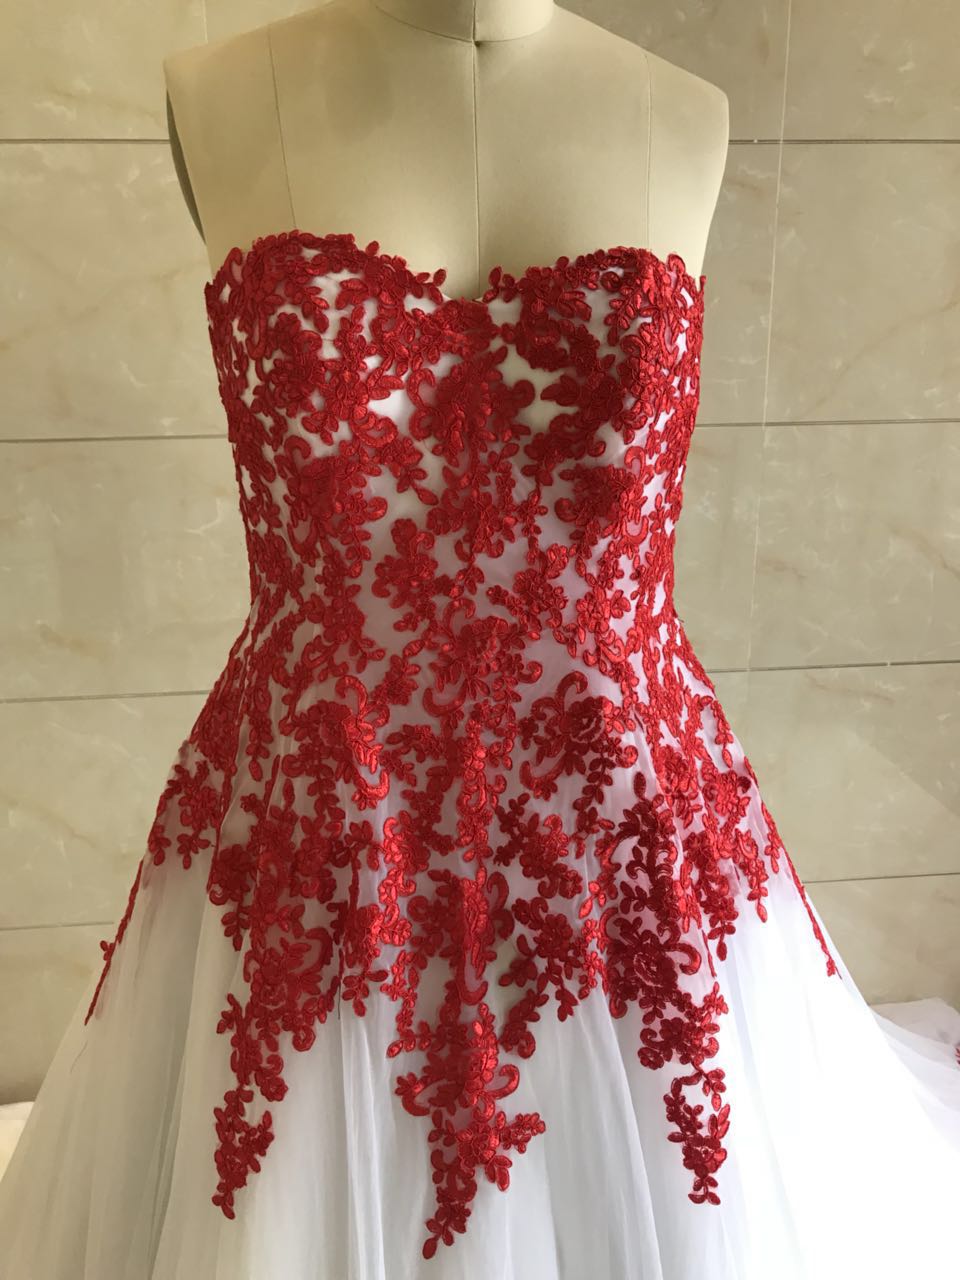 Red and white wedding dresses.